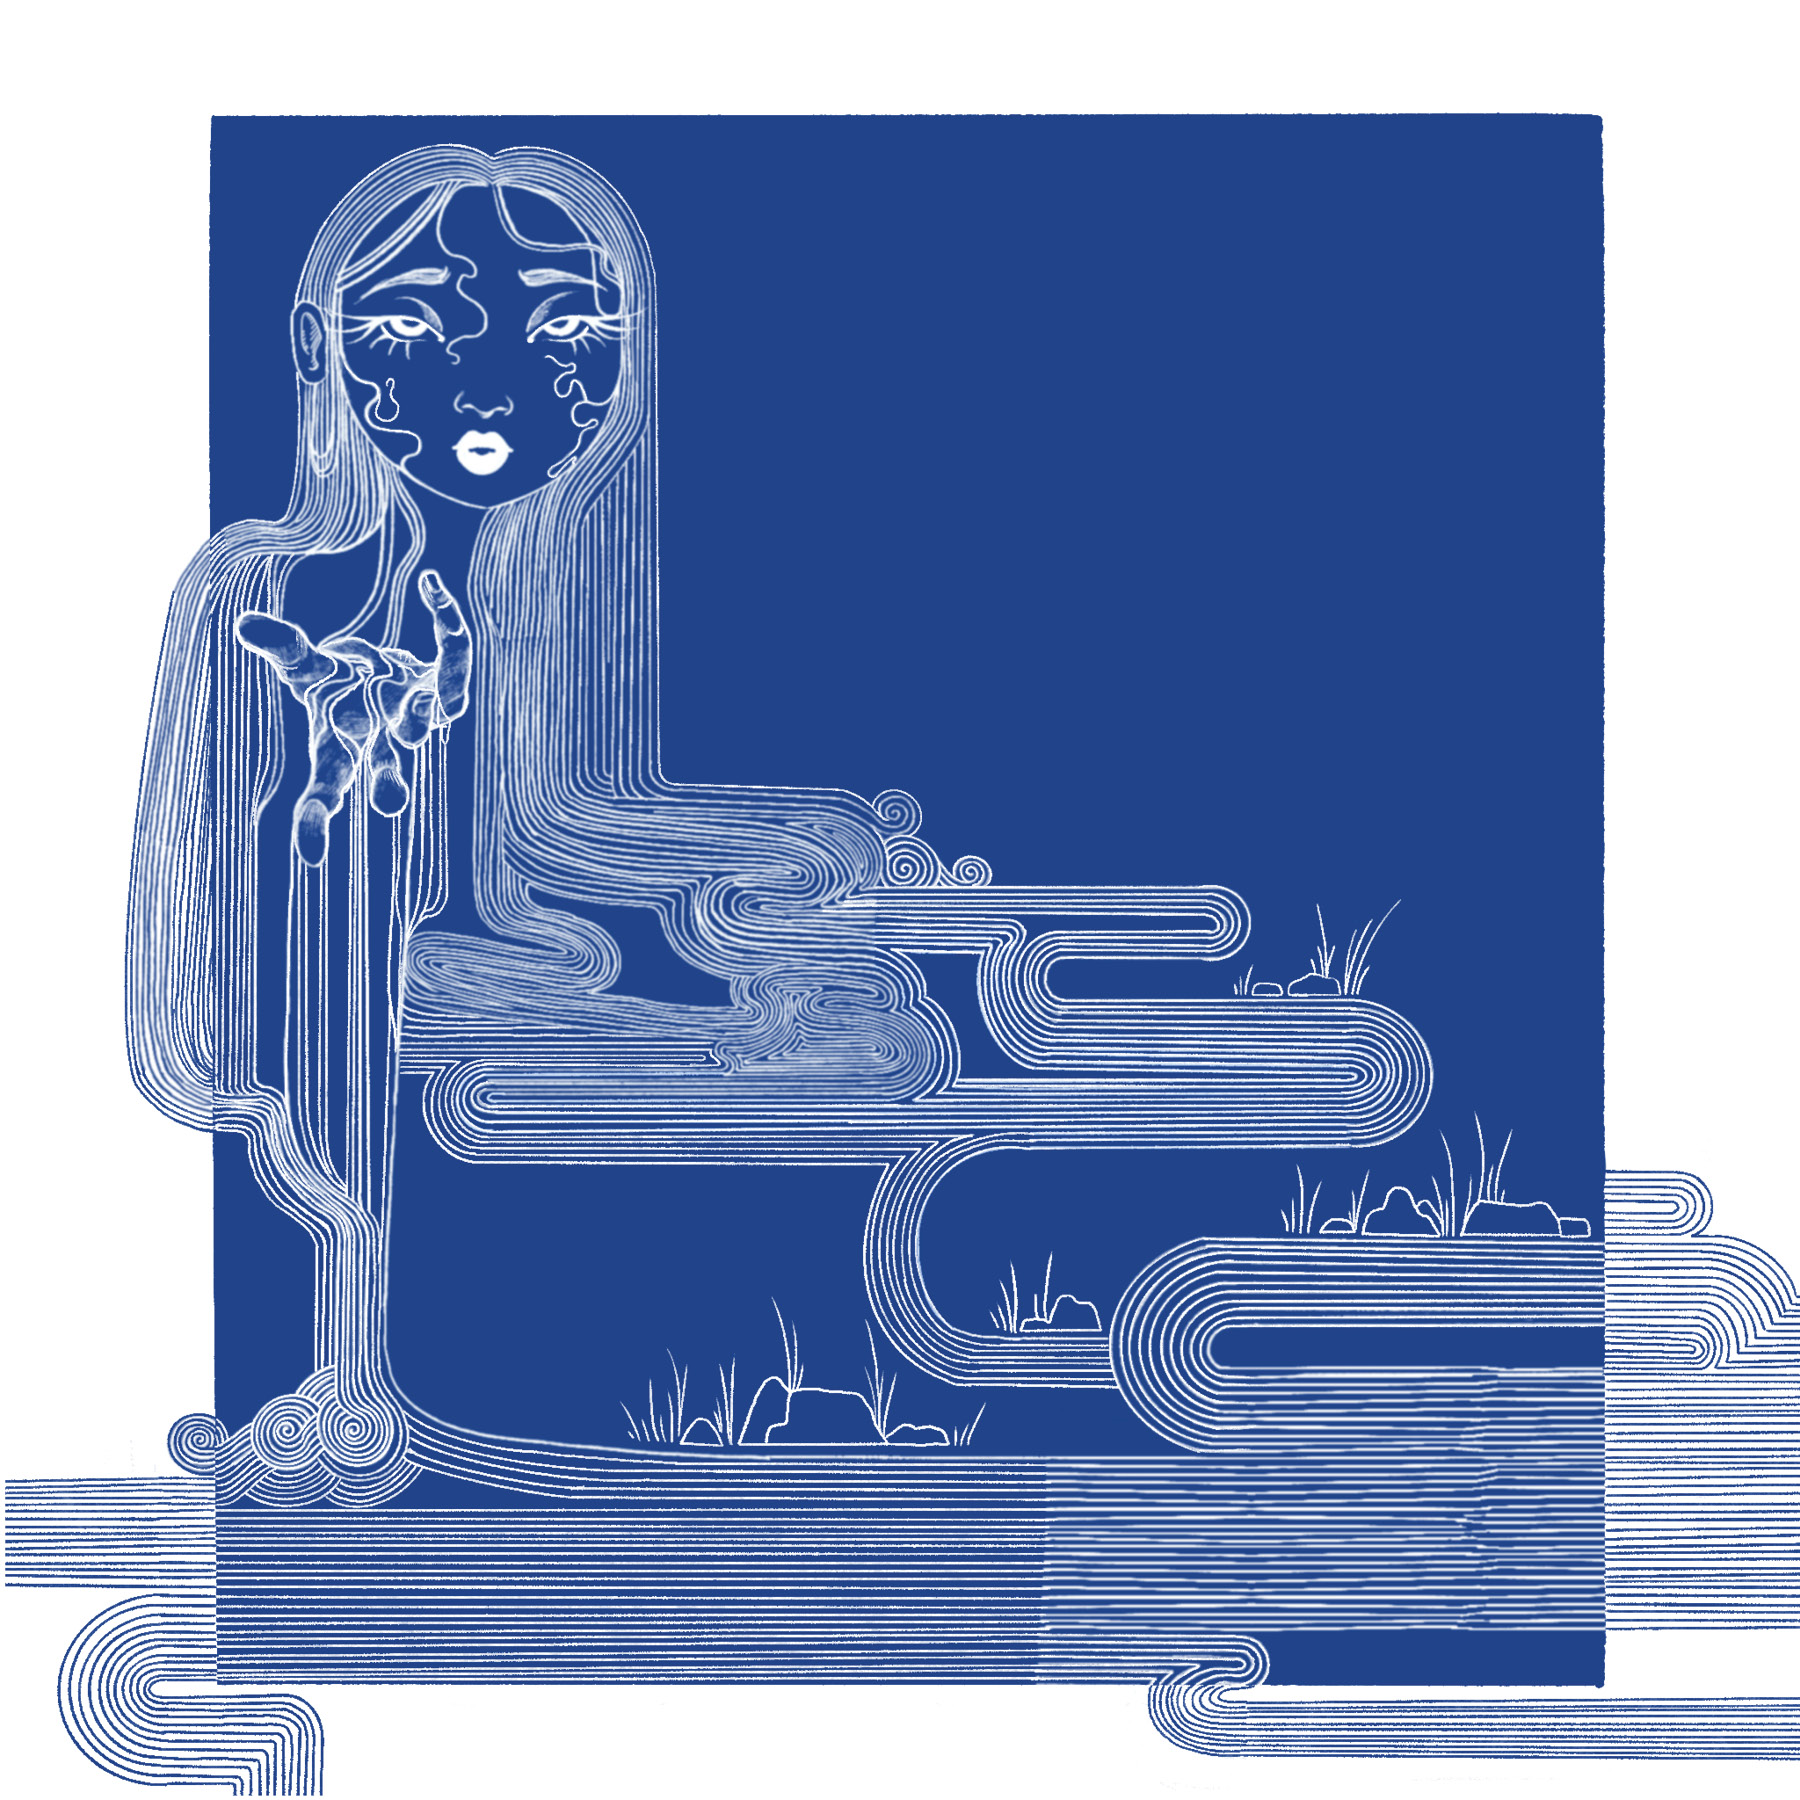 Blue illustrations of the river and a girl with hair flowing into the water for the haiku accordion fold.